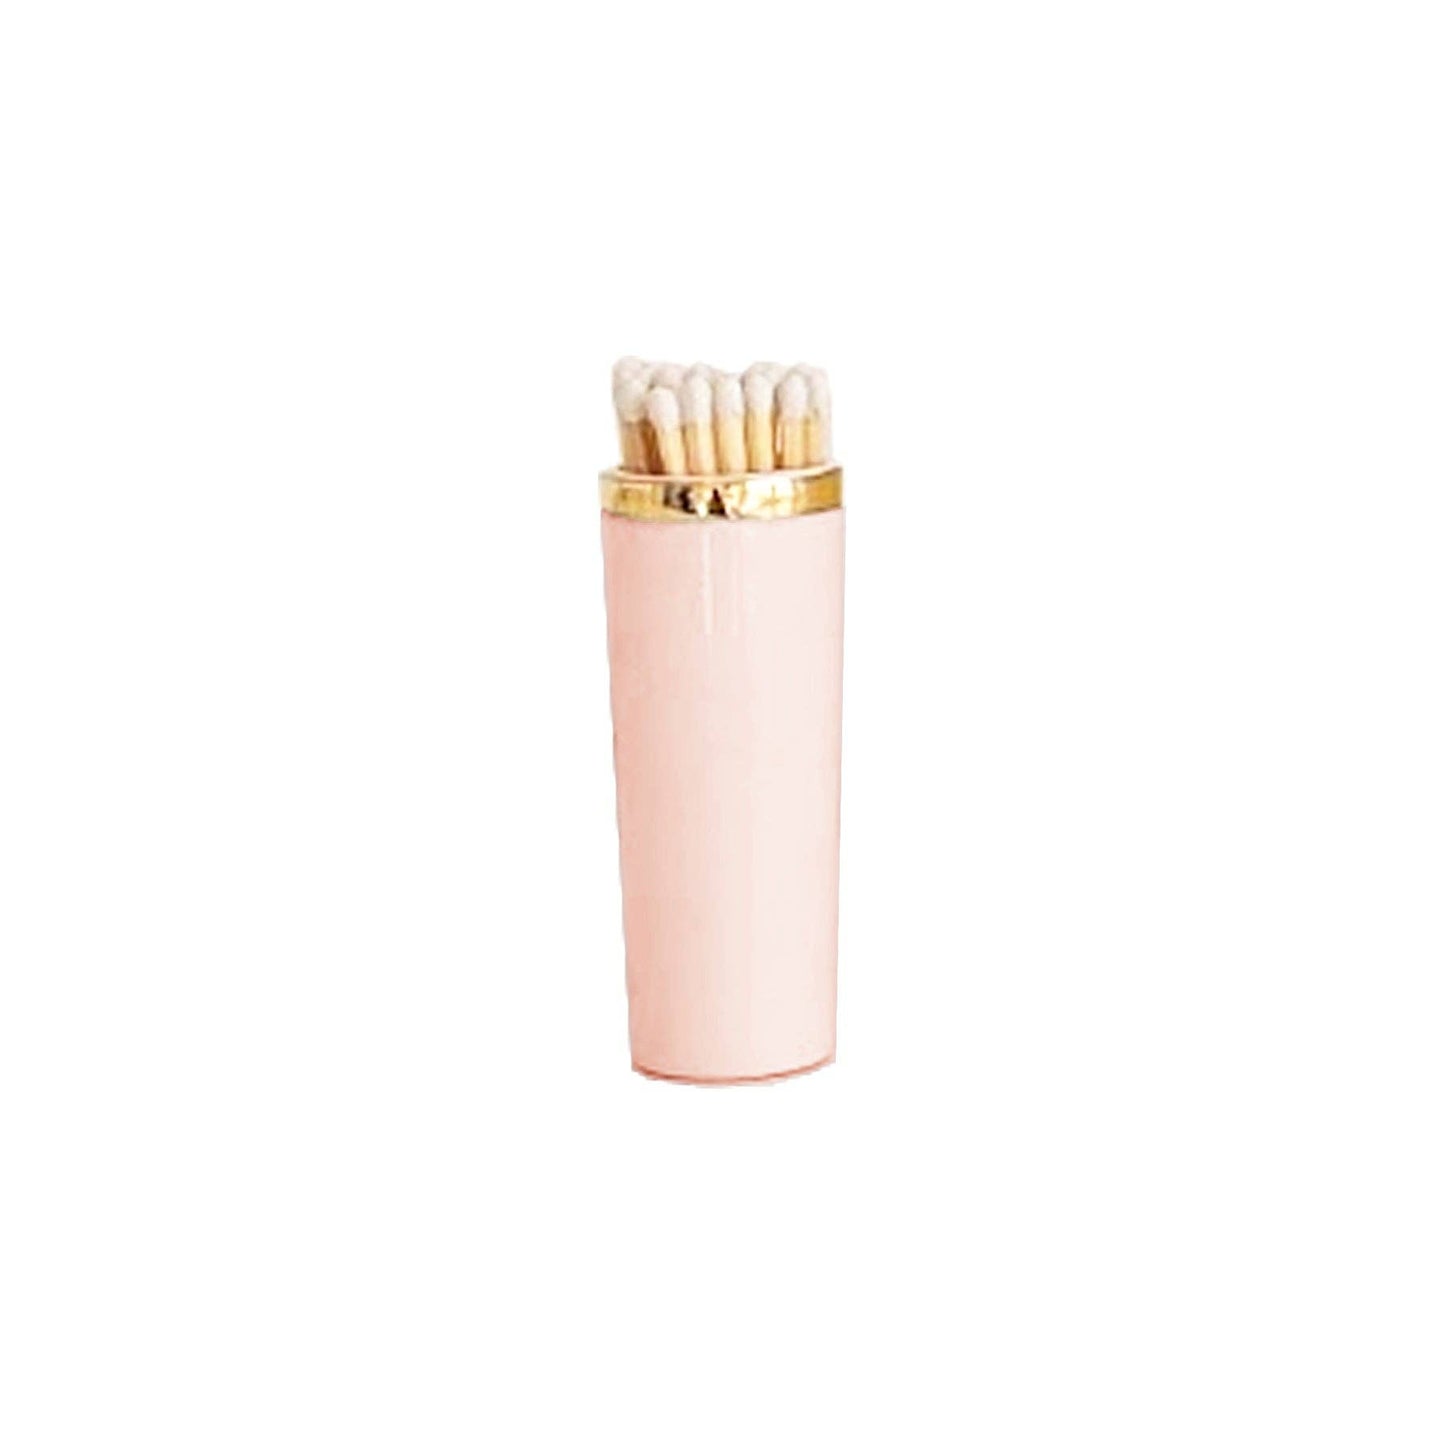 Solid Match Holder/ Striker with Gold Accent: White